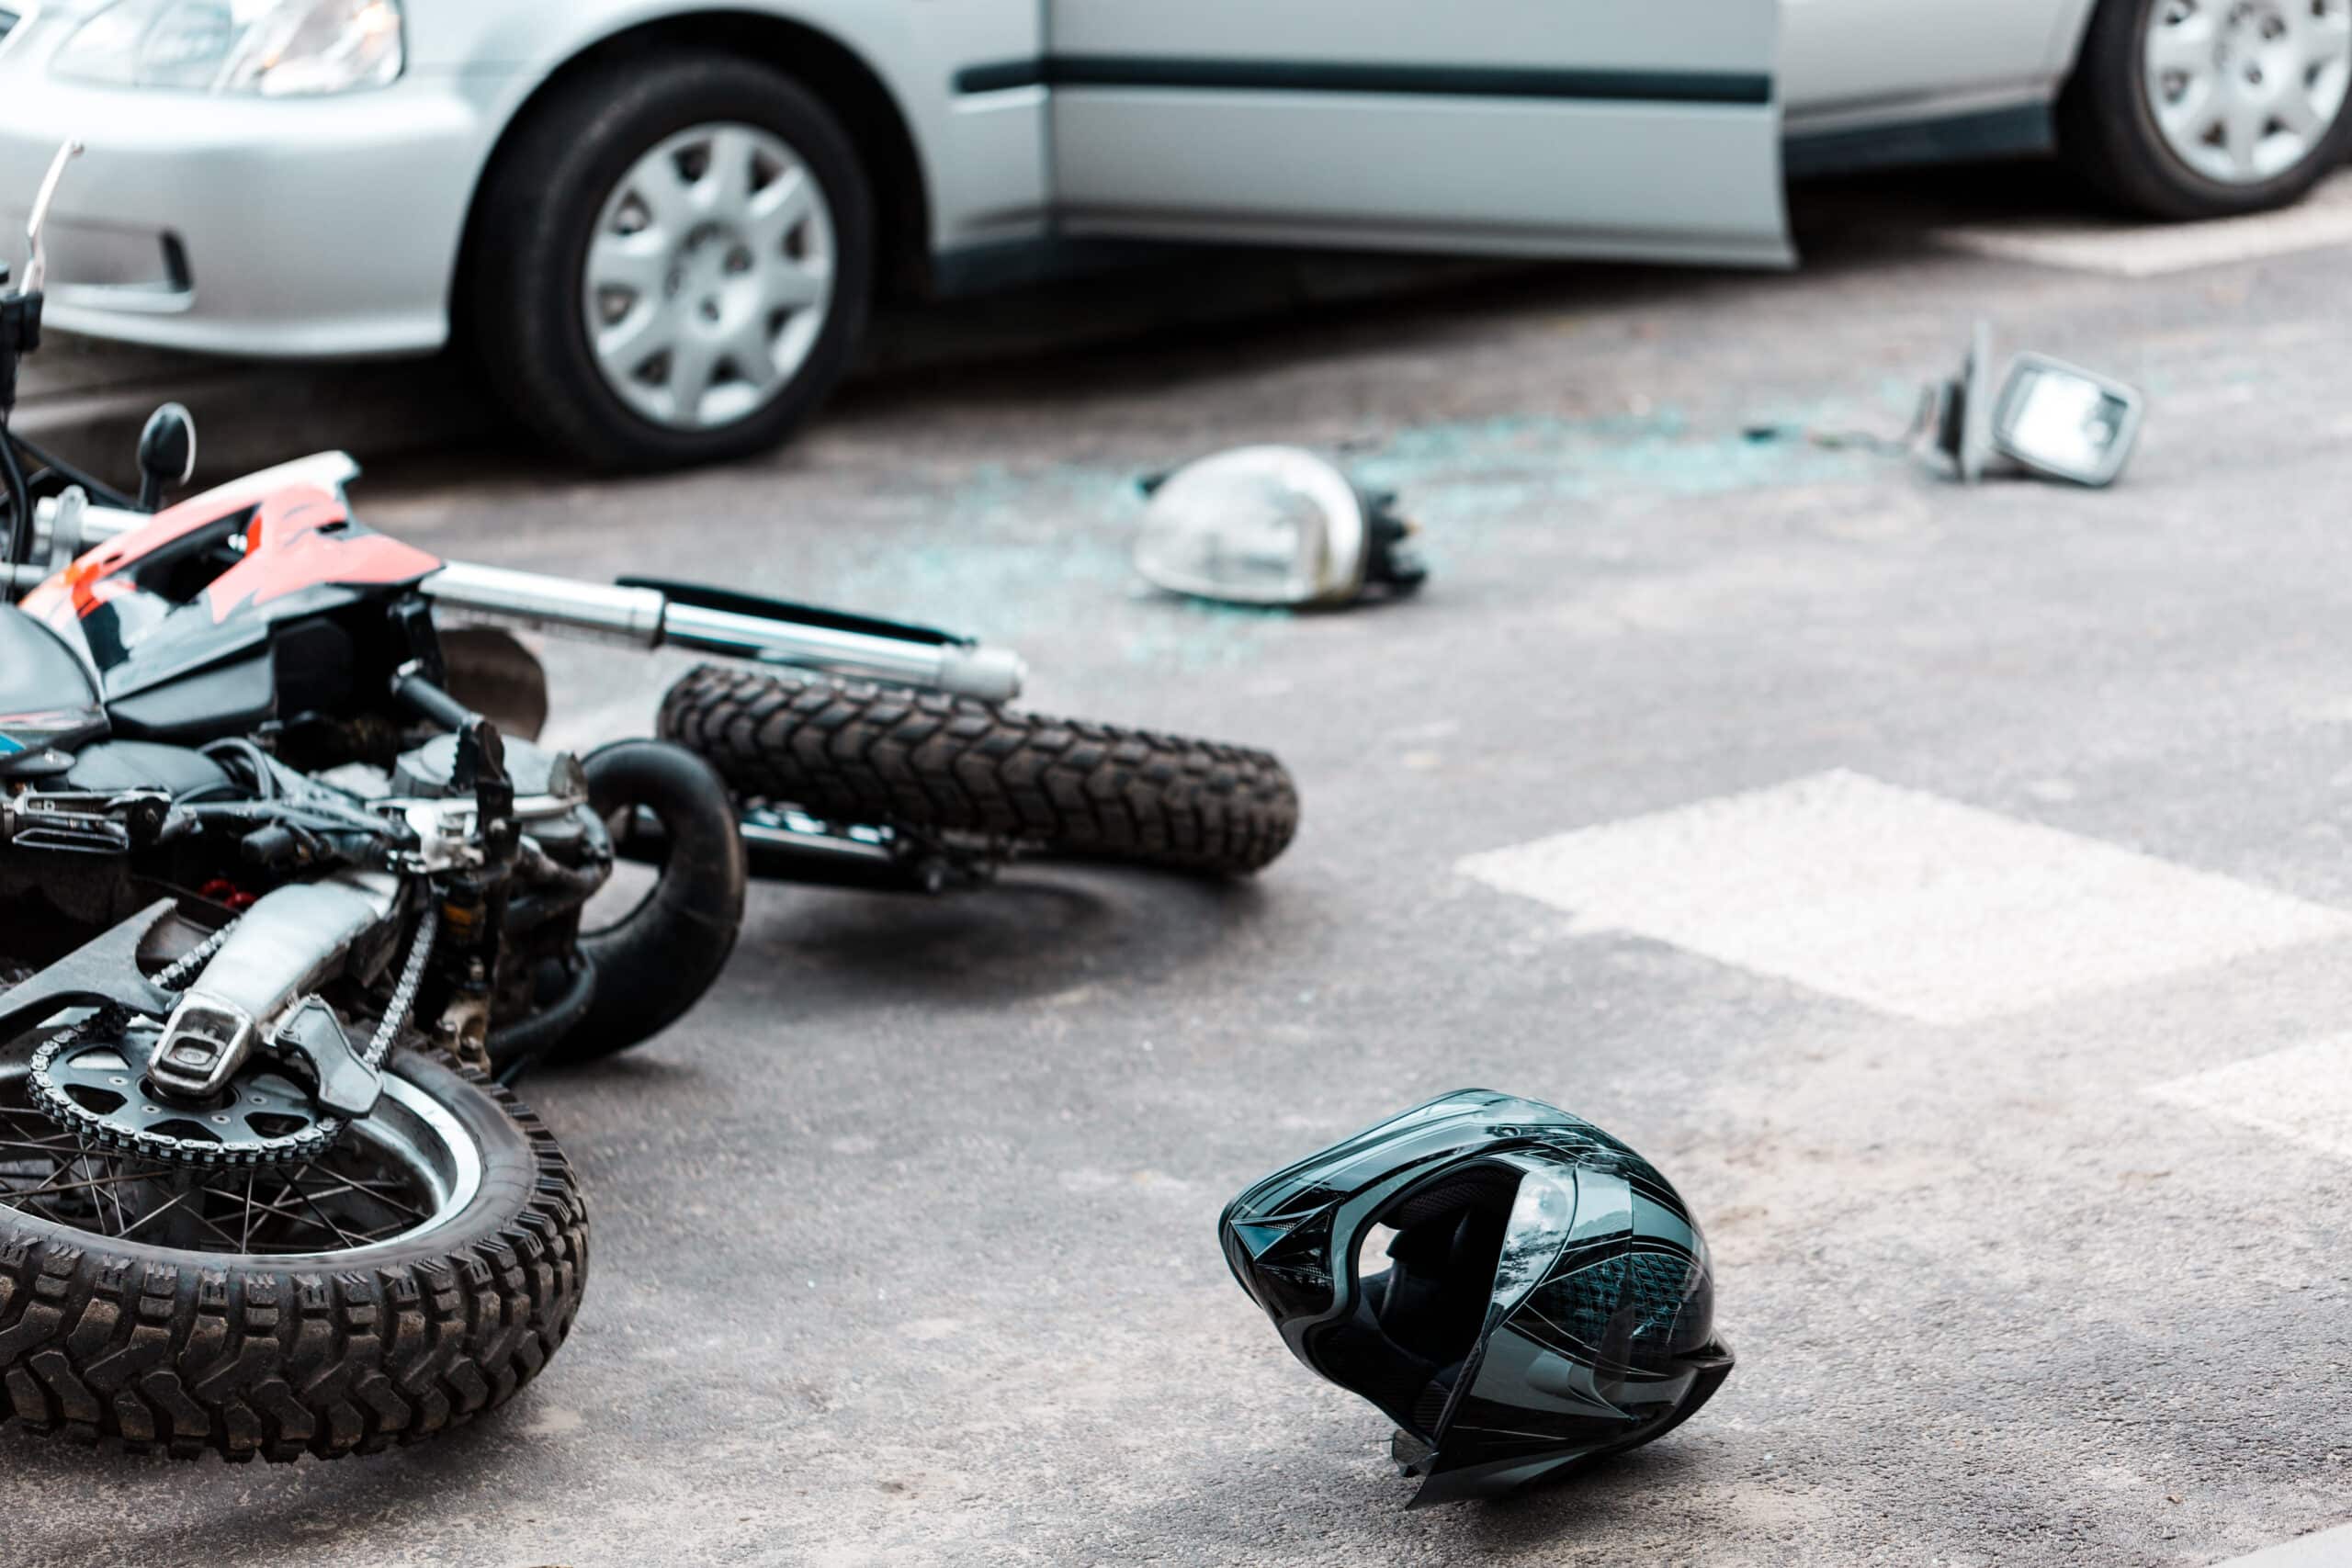 Motorcycle helmet on ground after accident